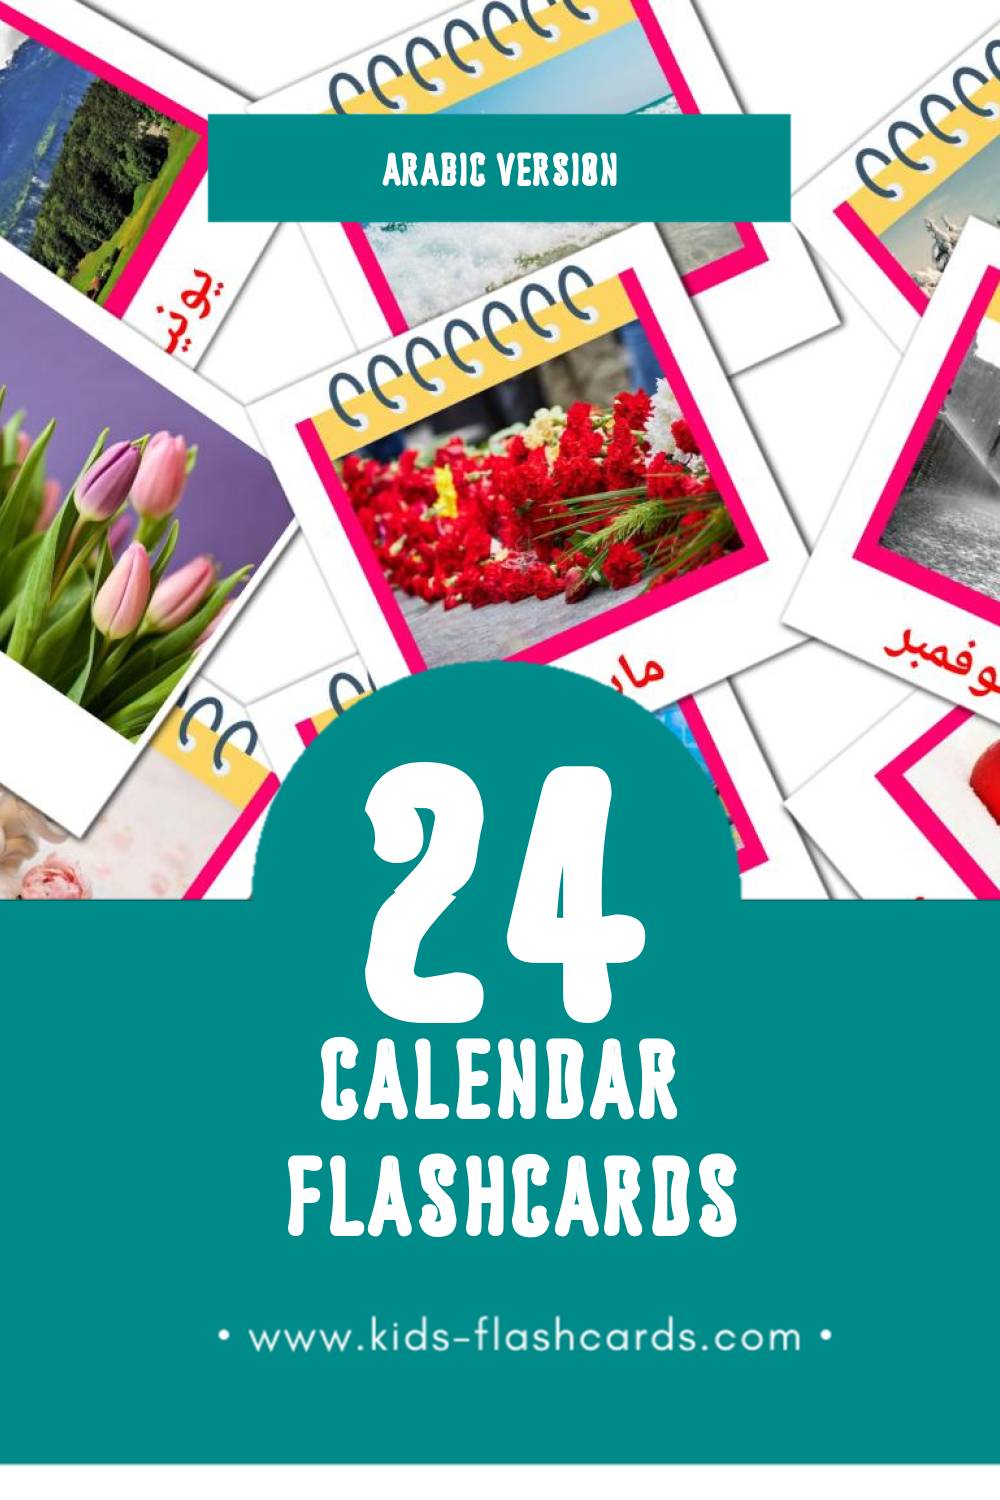 Visual الرزنامة Flashcards for Toddlers (12 cards in Arabic)